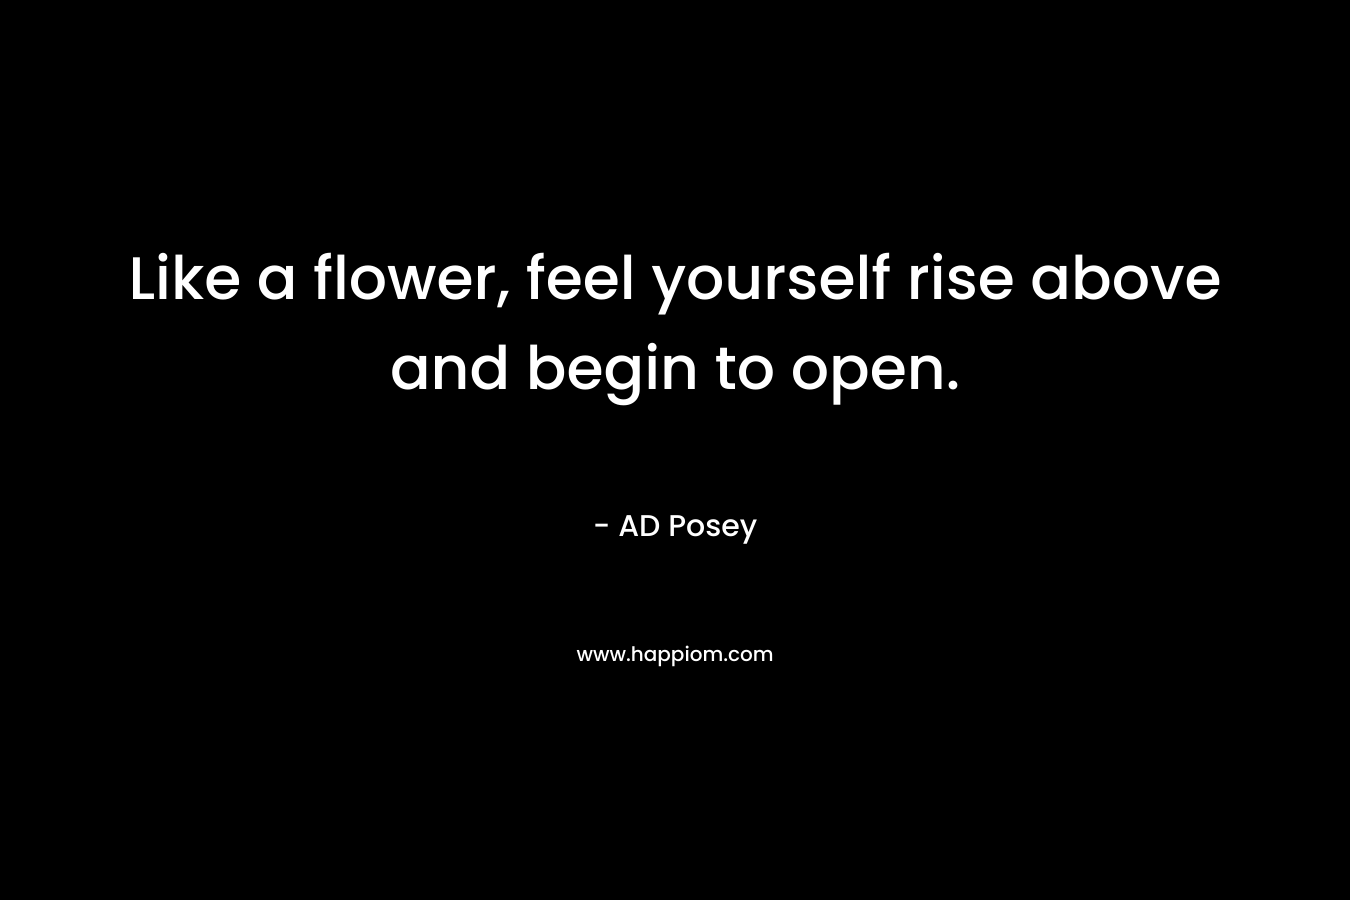 Like a flower, feel yourself rise above and begin to open.